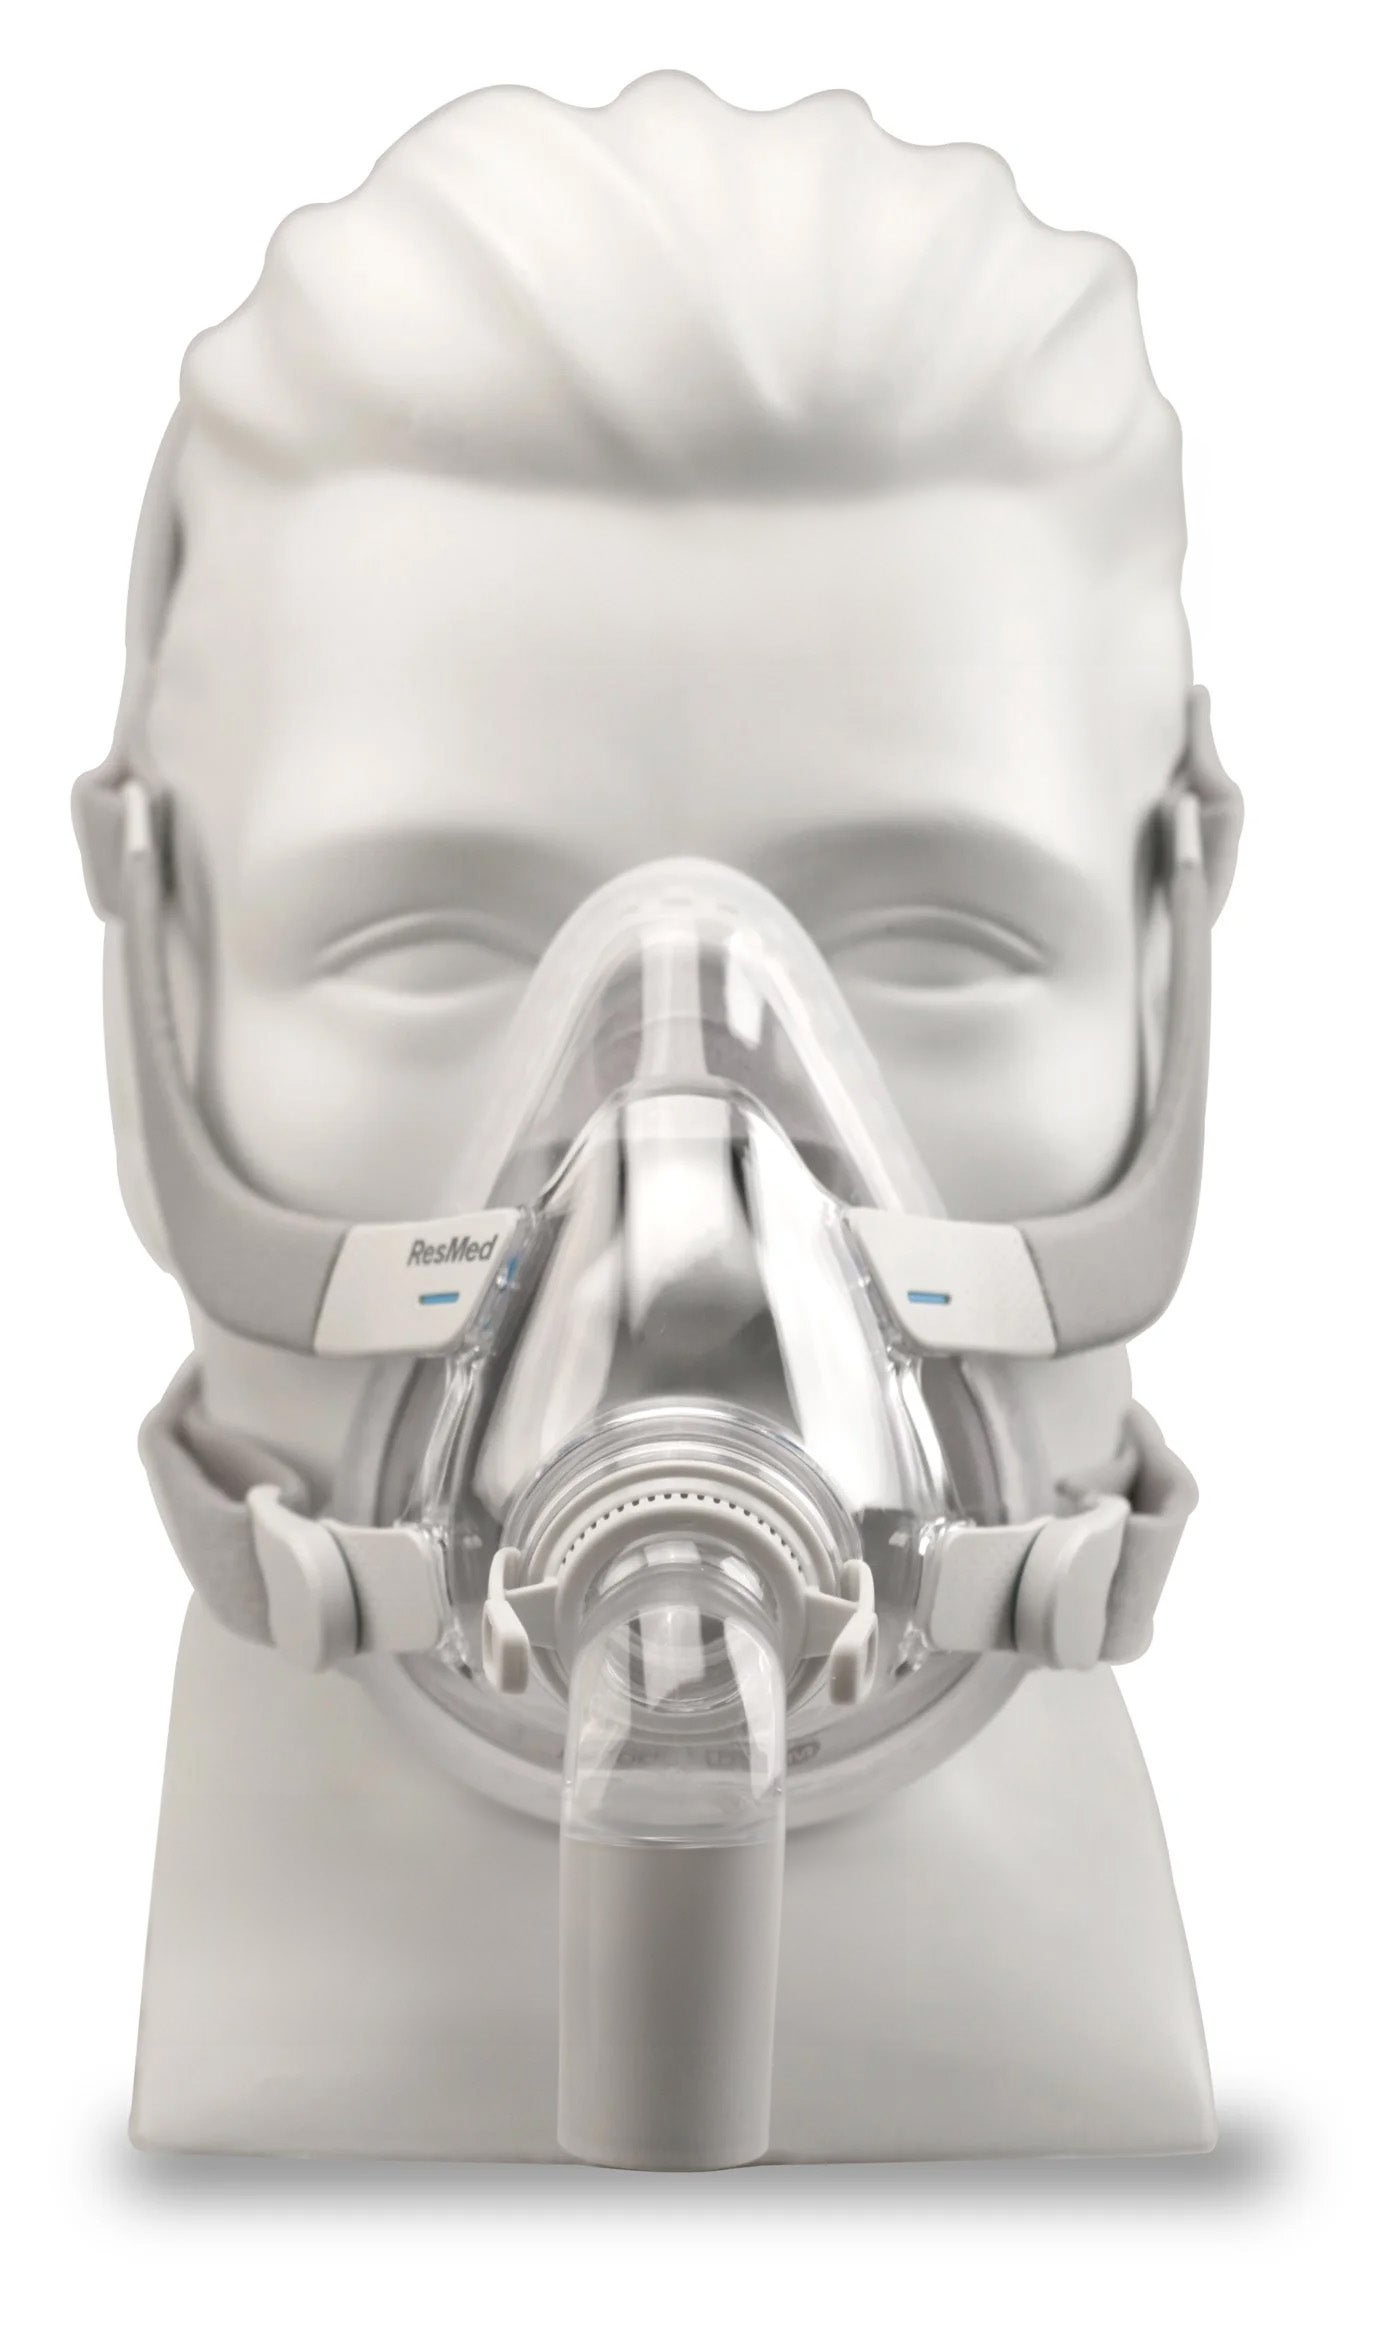 Resmed Airtouch F20™ Full Face Cpap Mask With Headgear 6865